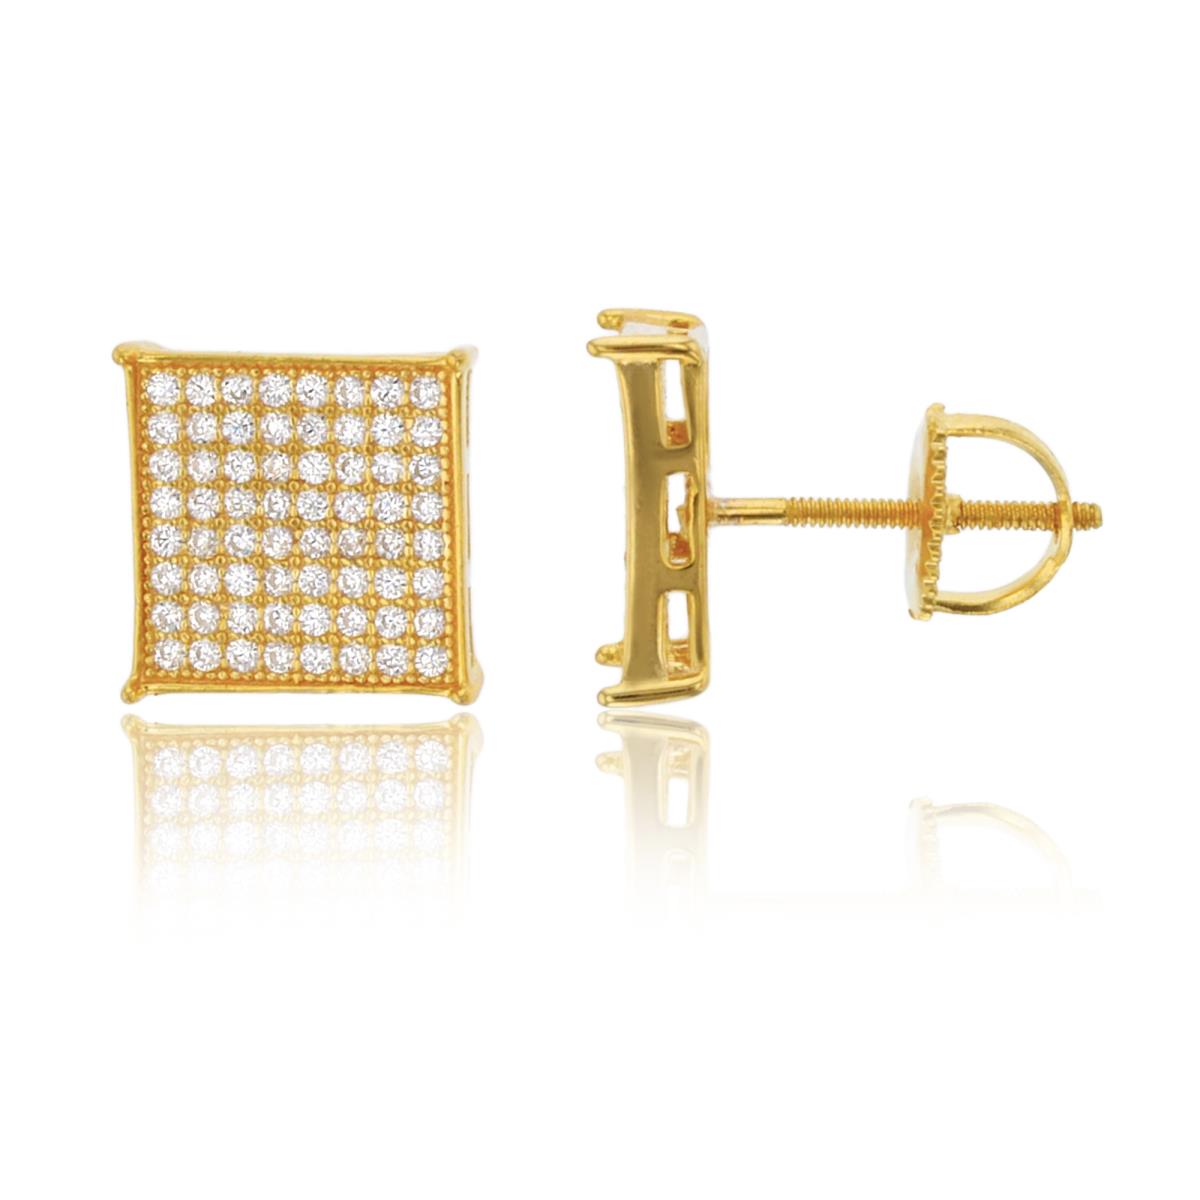 Sterling Silver Yellow 10x10mm Square Micropave Screwback Stud Earring